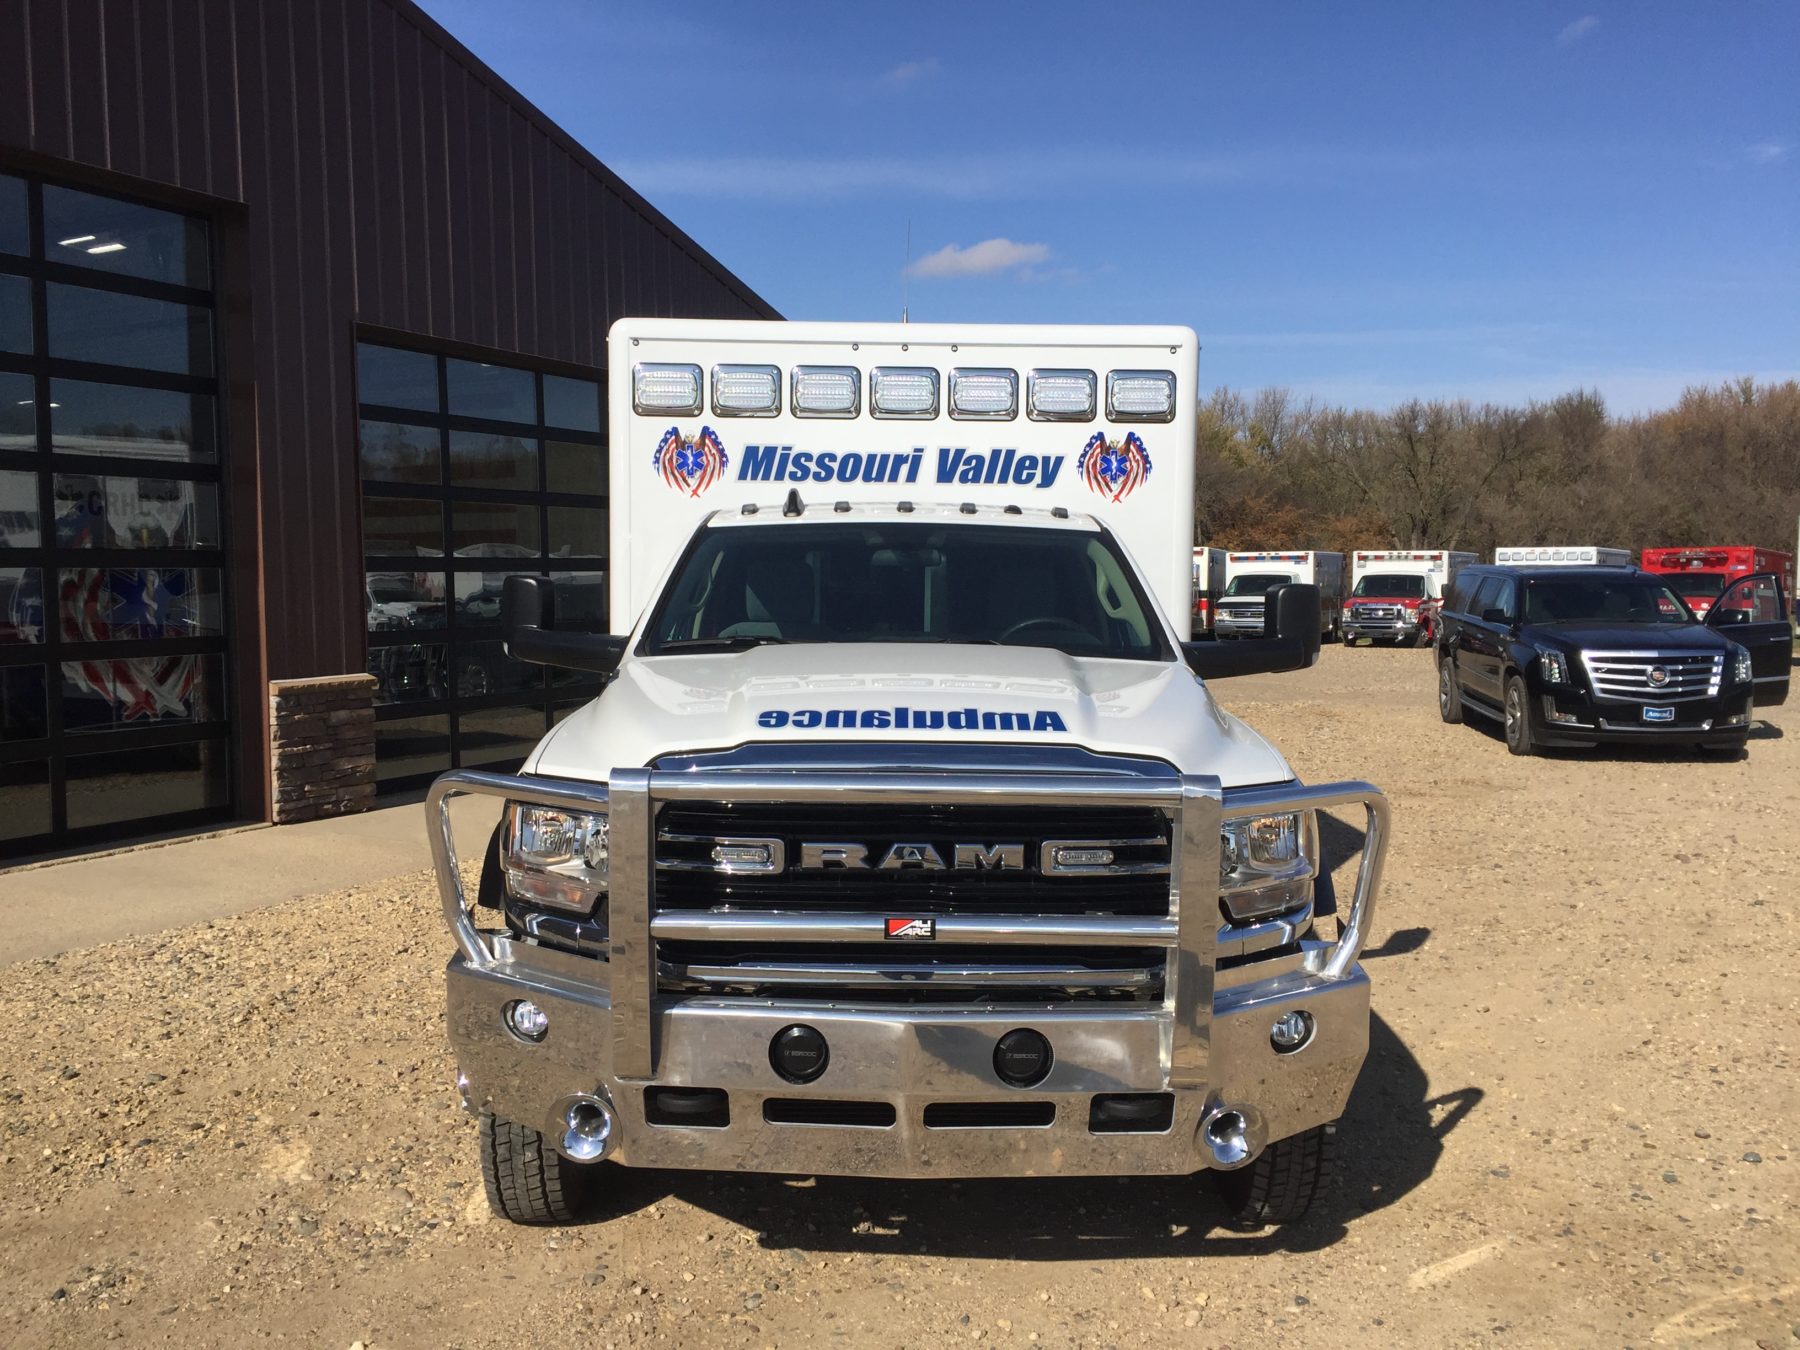 2019 Ram 4500 4x4 Heavy Duty Ambulance For Sale – Picture 7